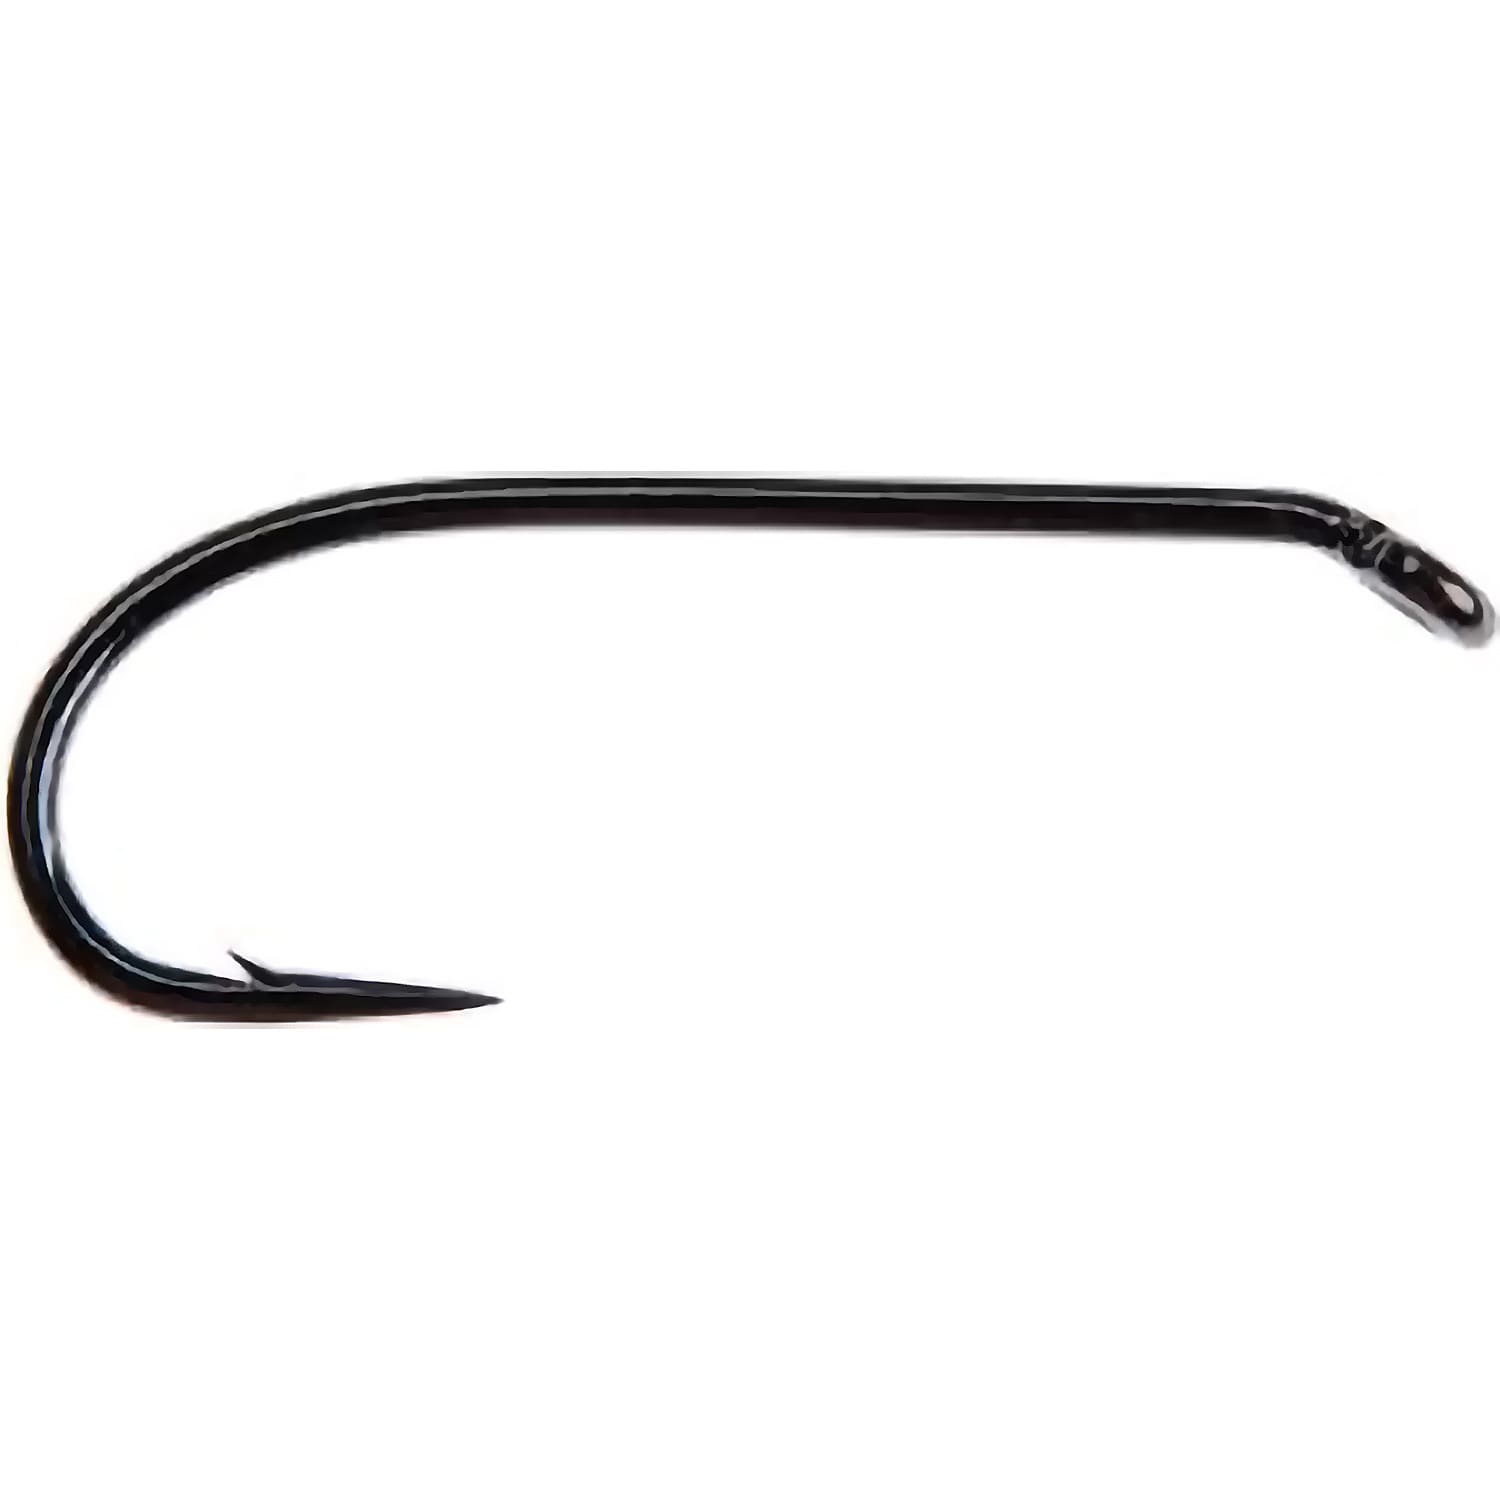 Ahrex® Nymph Traditional Hook – 24-Pack